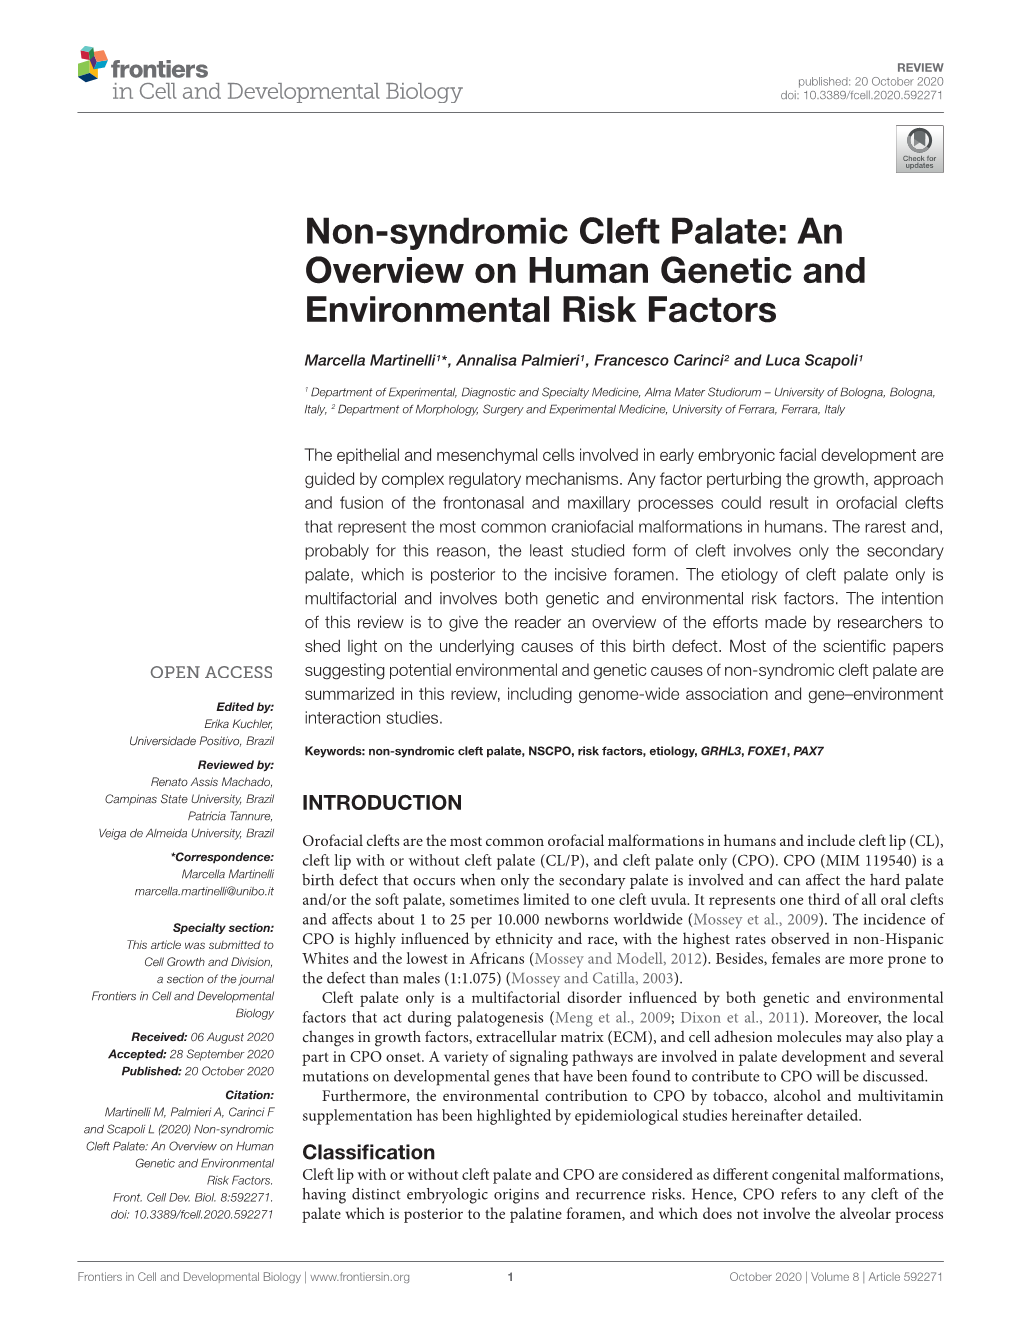 Non-Syndromic Cleft Palate: an Overview on Human Genetic and Environmental Risk Factors